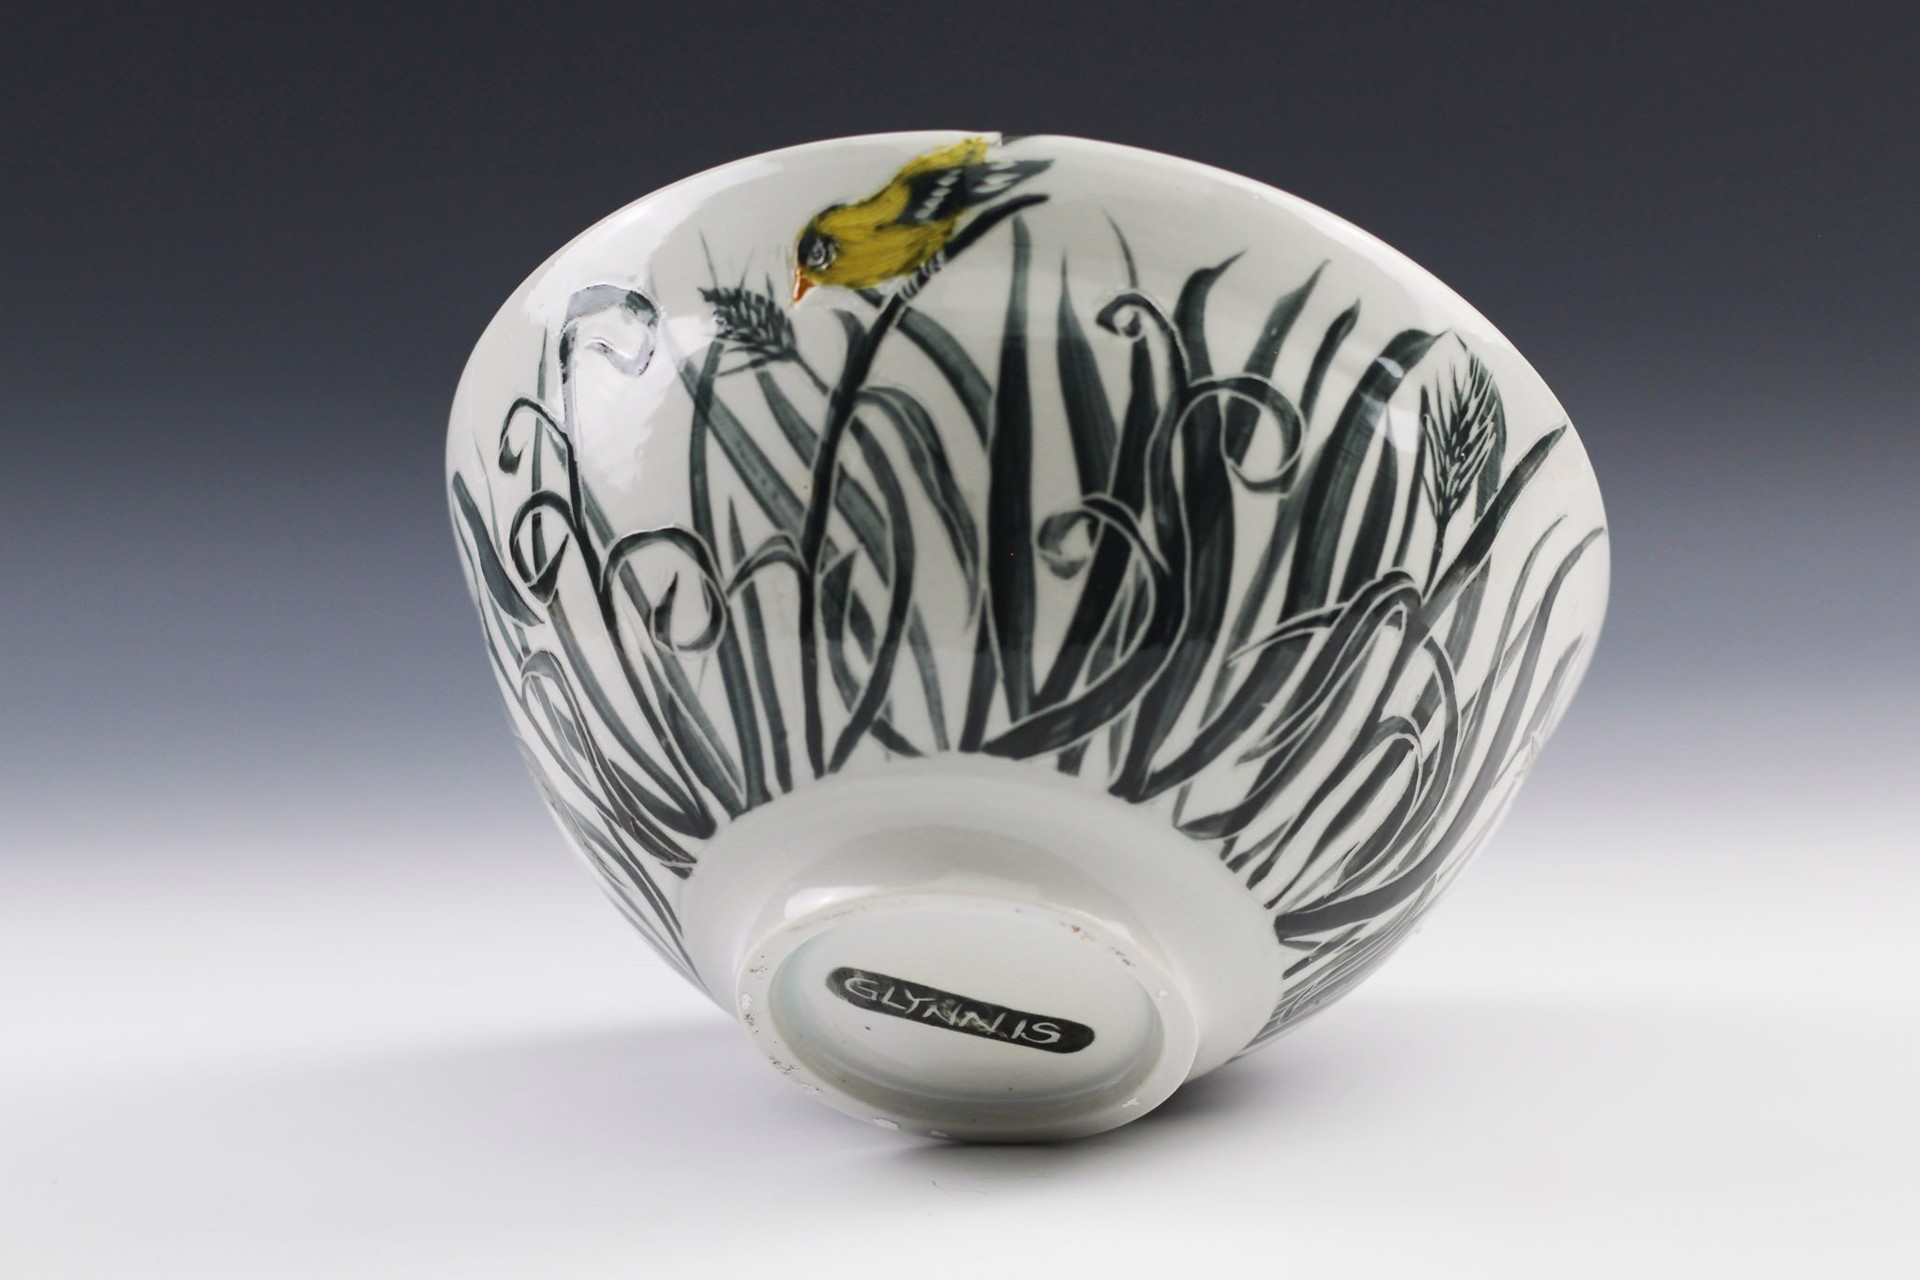 Goldfinch Bowl by Glynnis Lessing